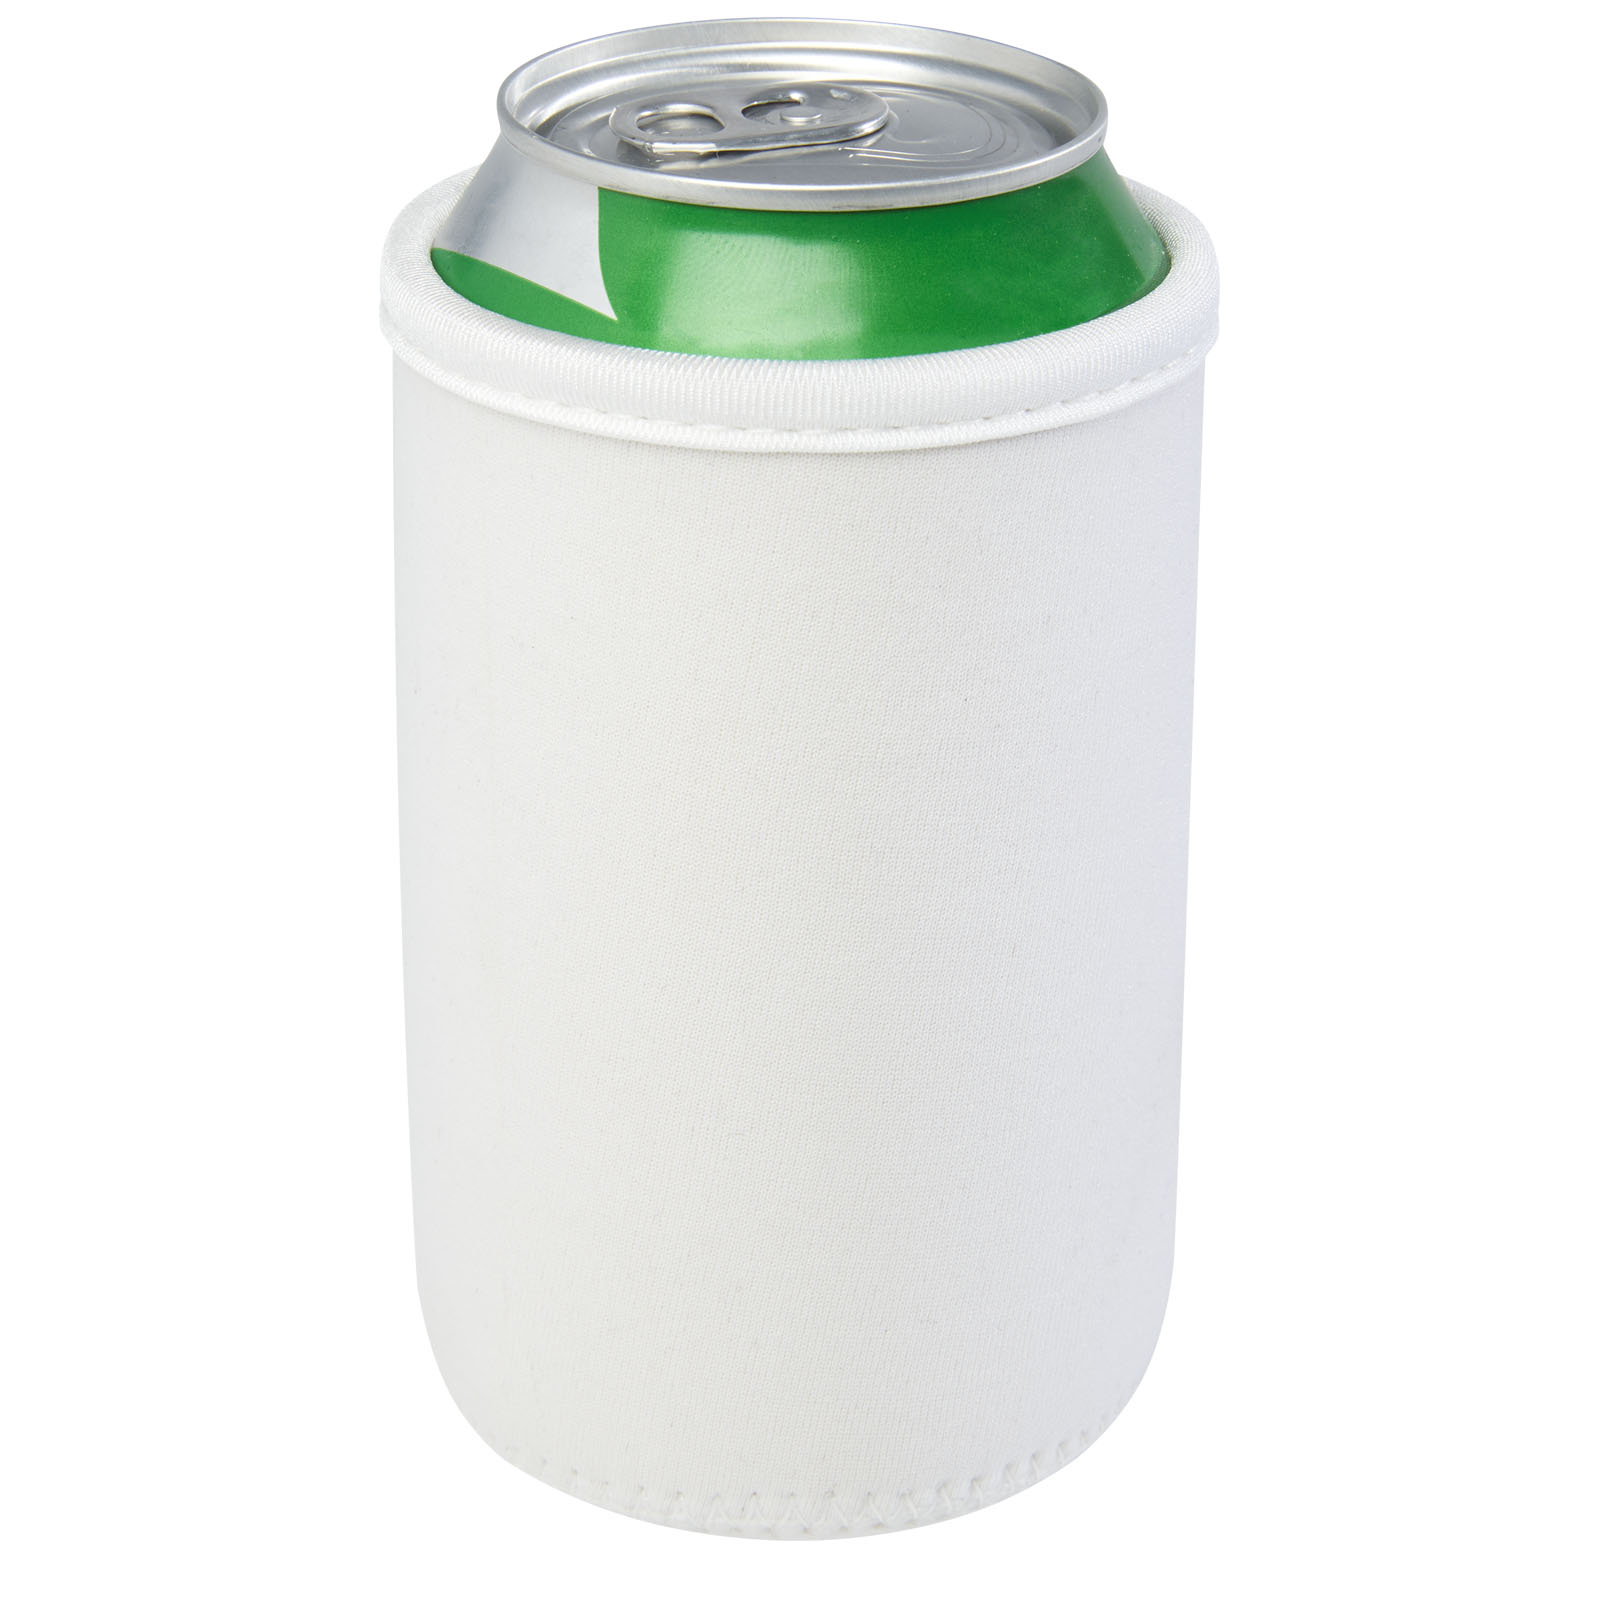 Bags - Vrie recycled neoprene can sleeve holder